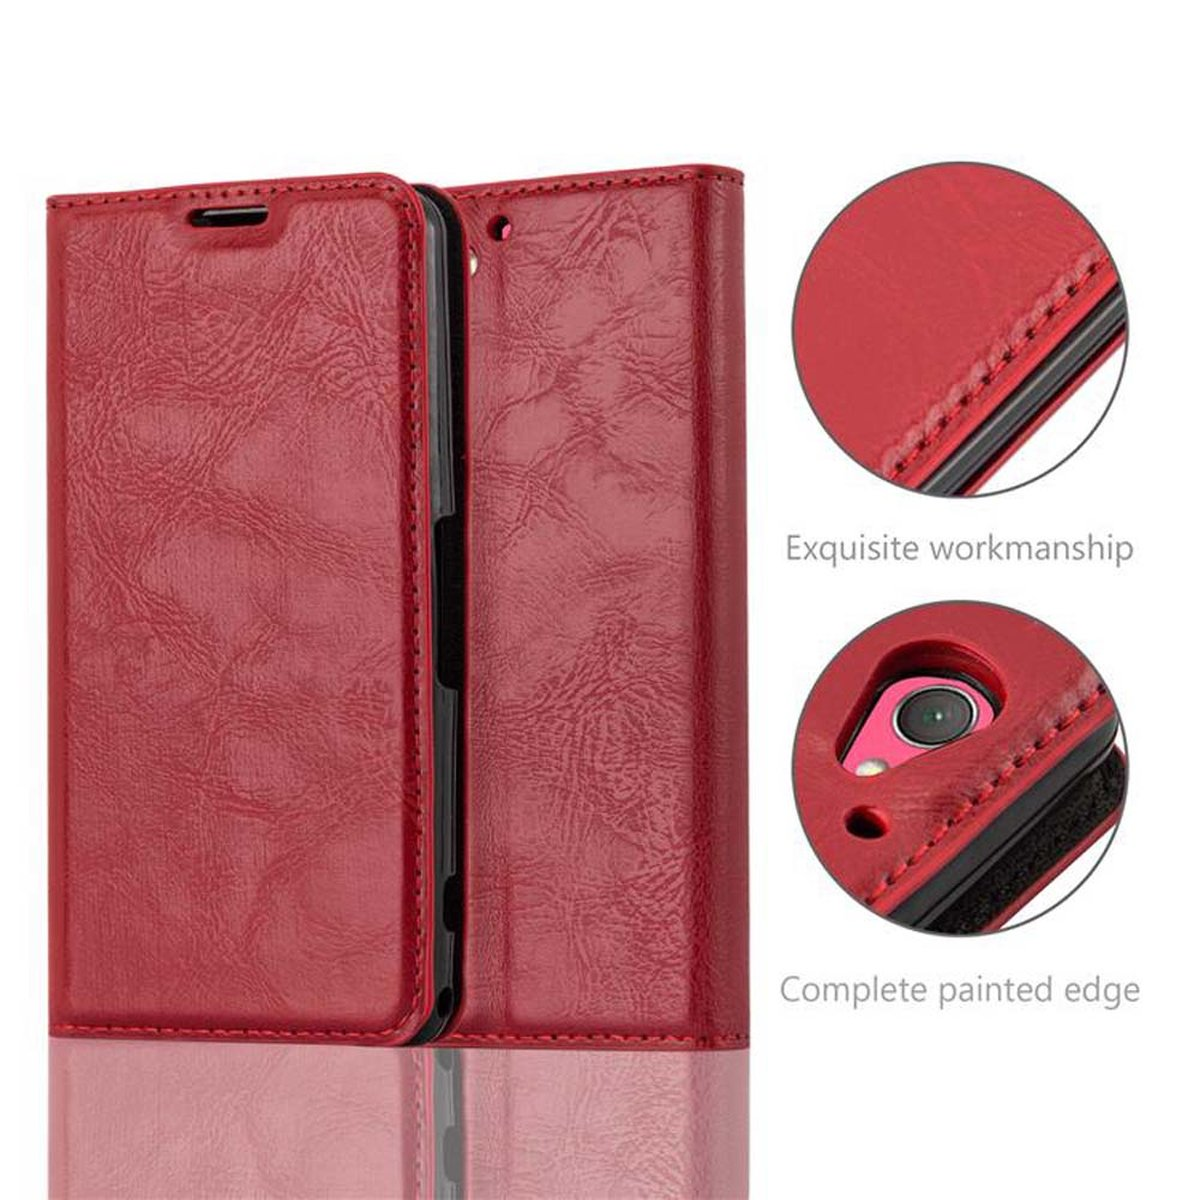 APFEL COMPACT, Magnet, Z2 Book Invisible Bookcover, Xperia Sony, ROT Hülle CADORABO